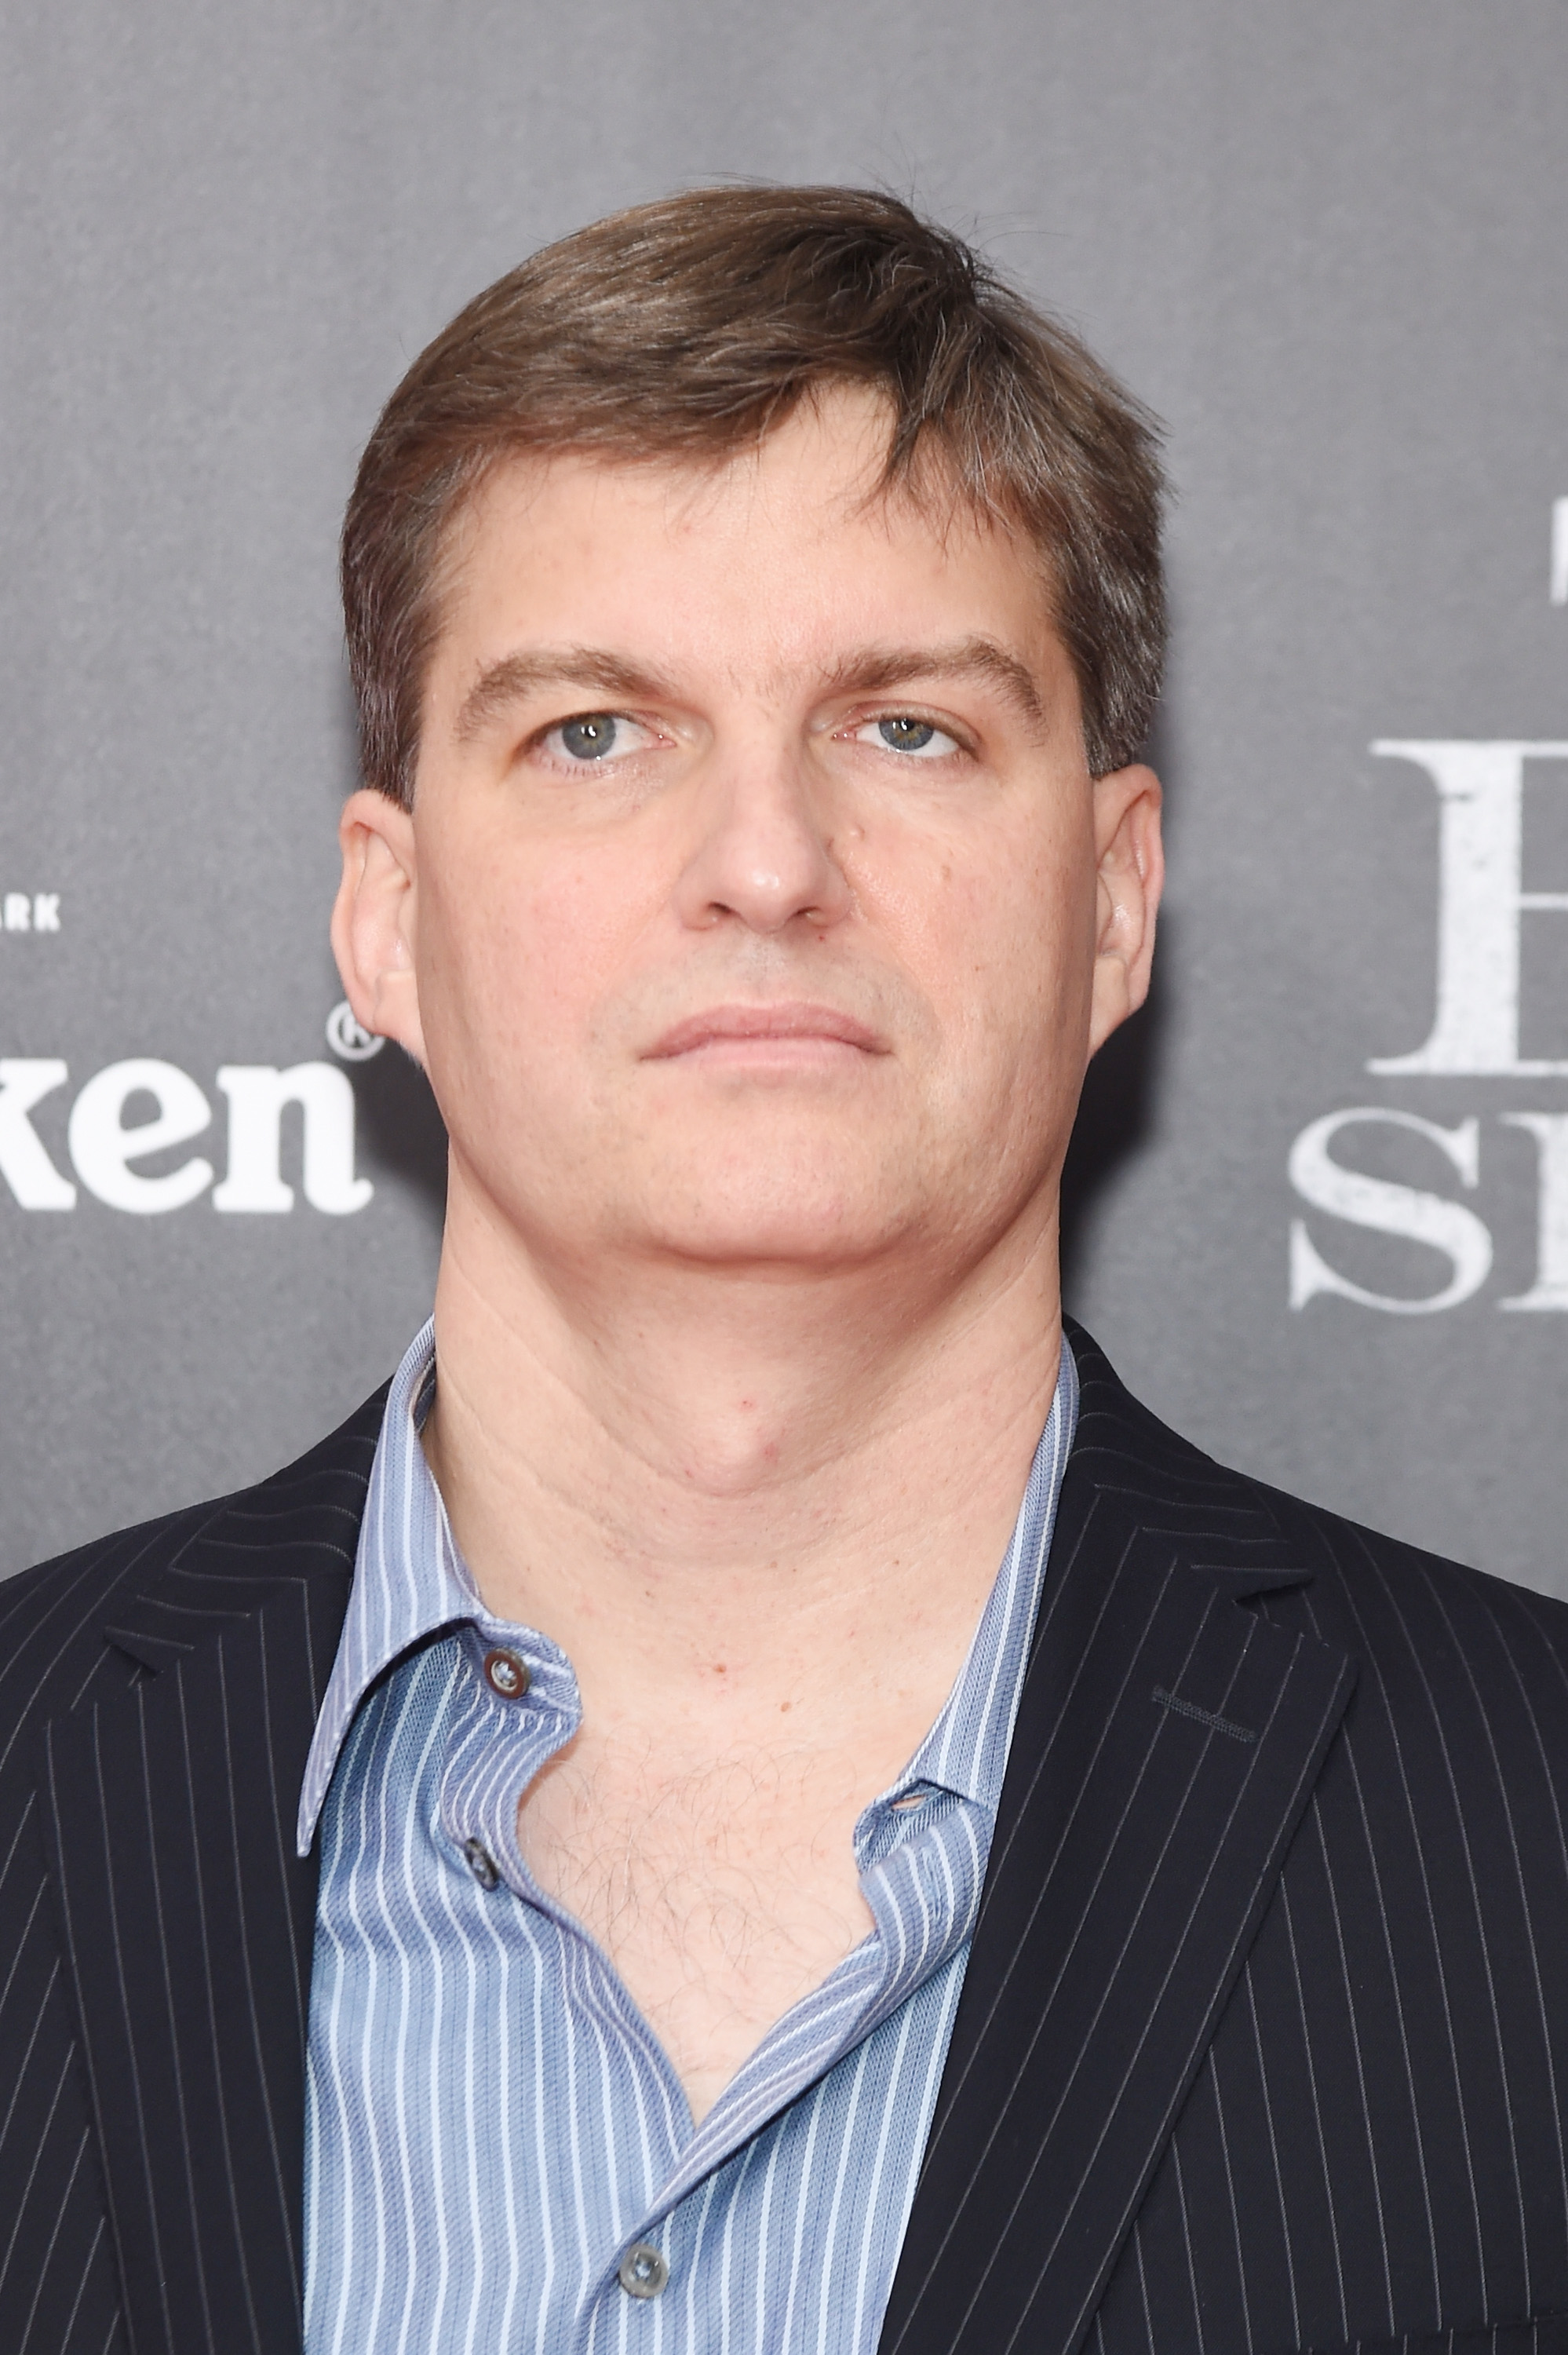 Michael Burry's Wife: The Investor Has Been Married at Least Twice